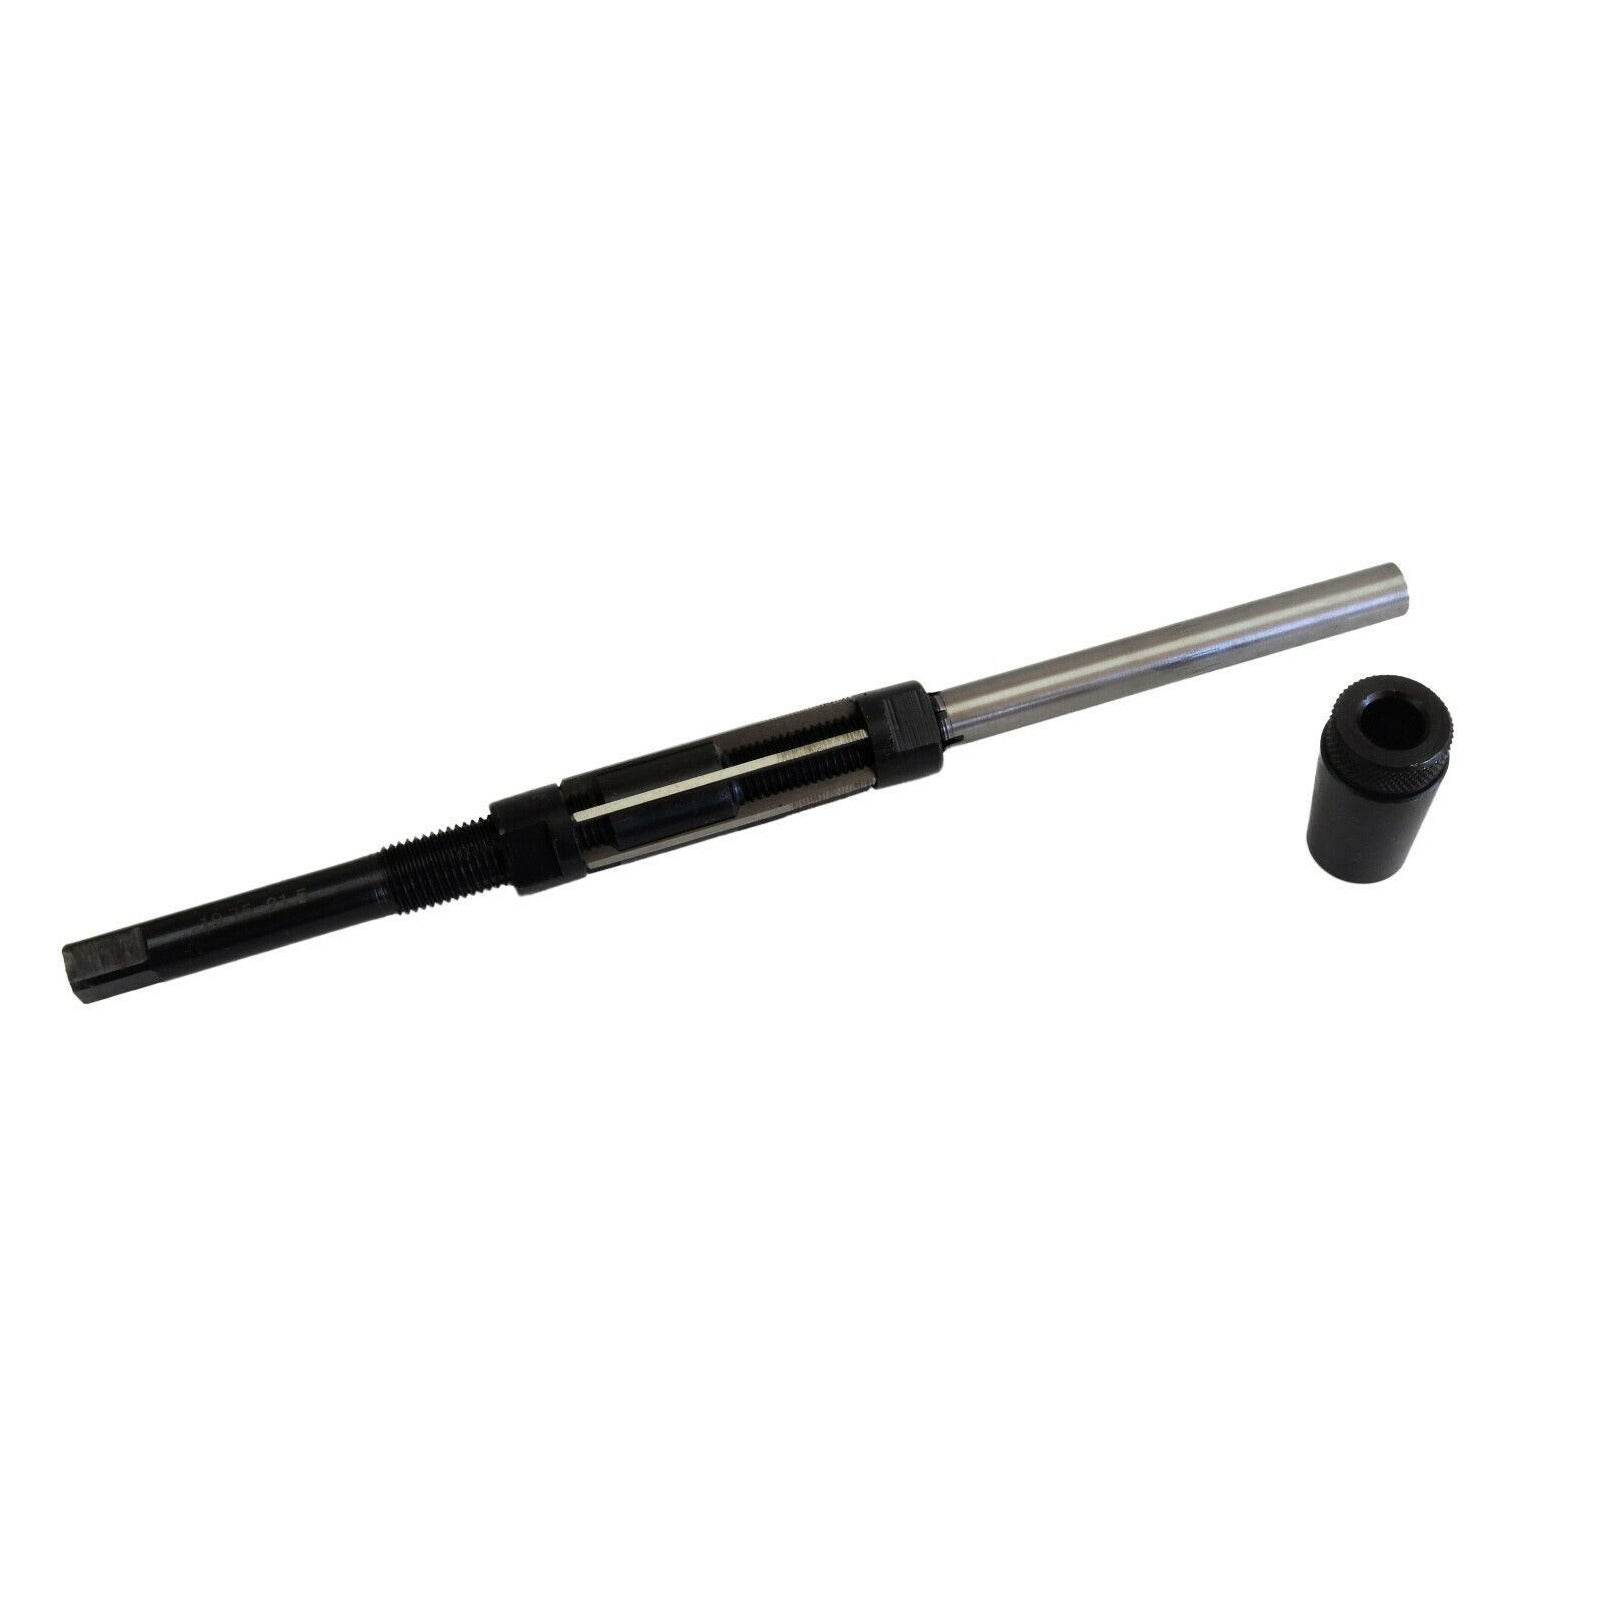 19.75 - 21.5mm Adjustable Hand Reamer with Guide